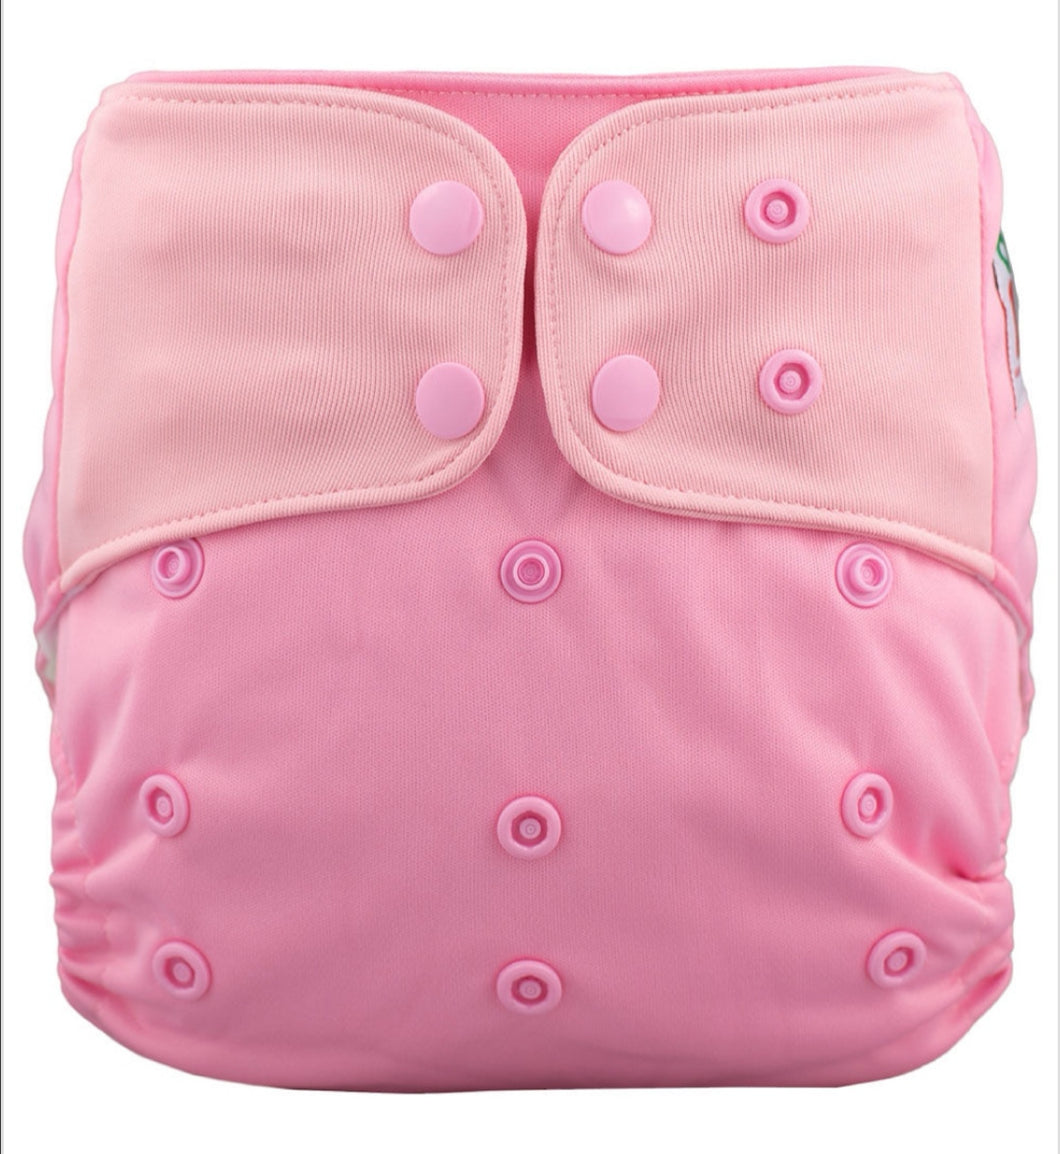 Lichtbaby pocket, Pink. Includes 1 bamboo terry insert